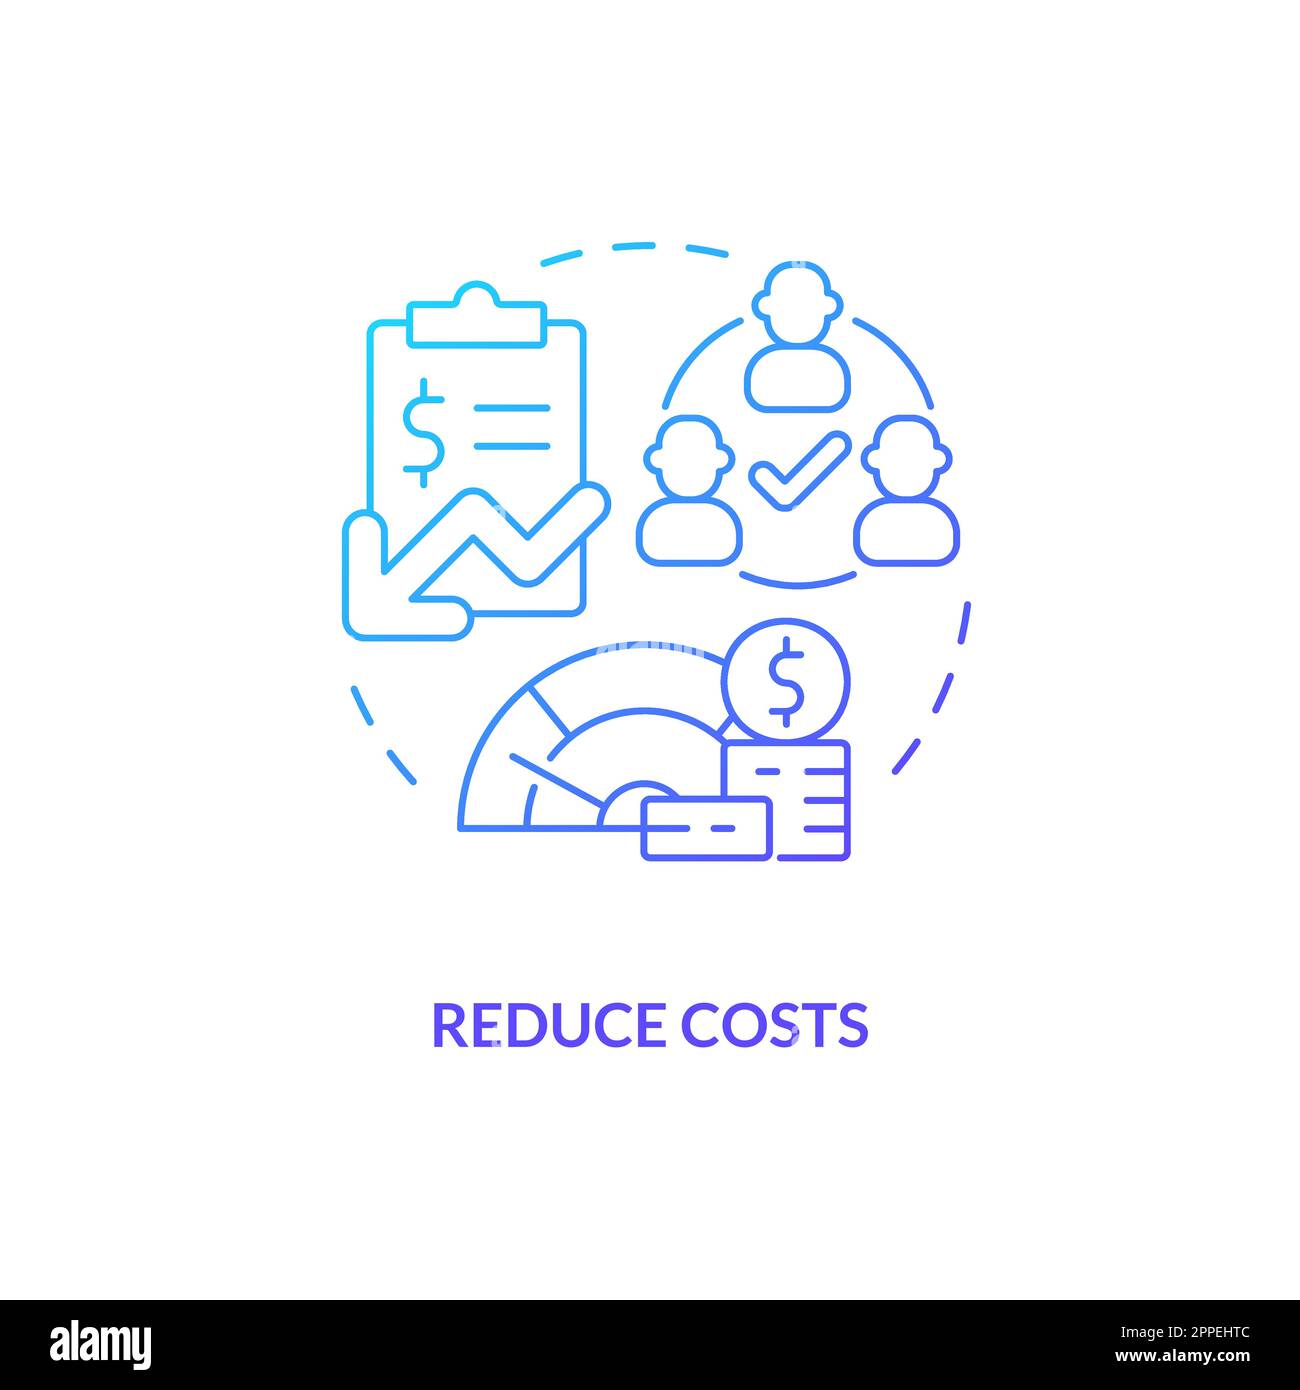 Reduce costs blue gradient concept icon Stock Vector